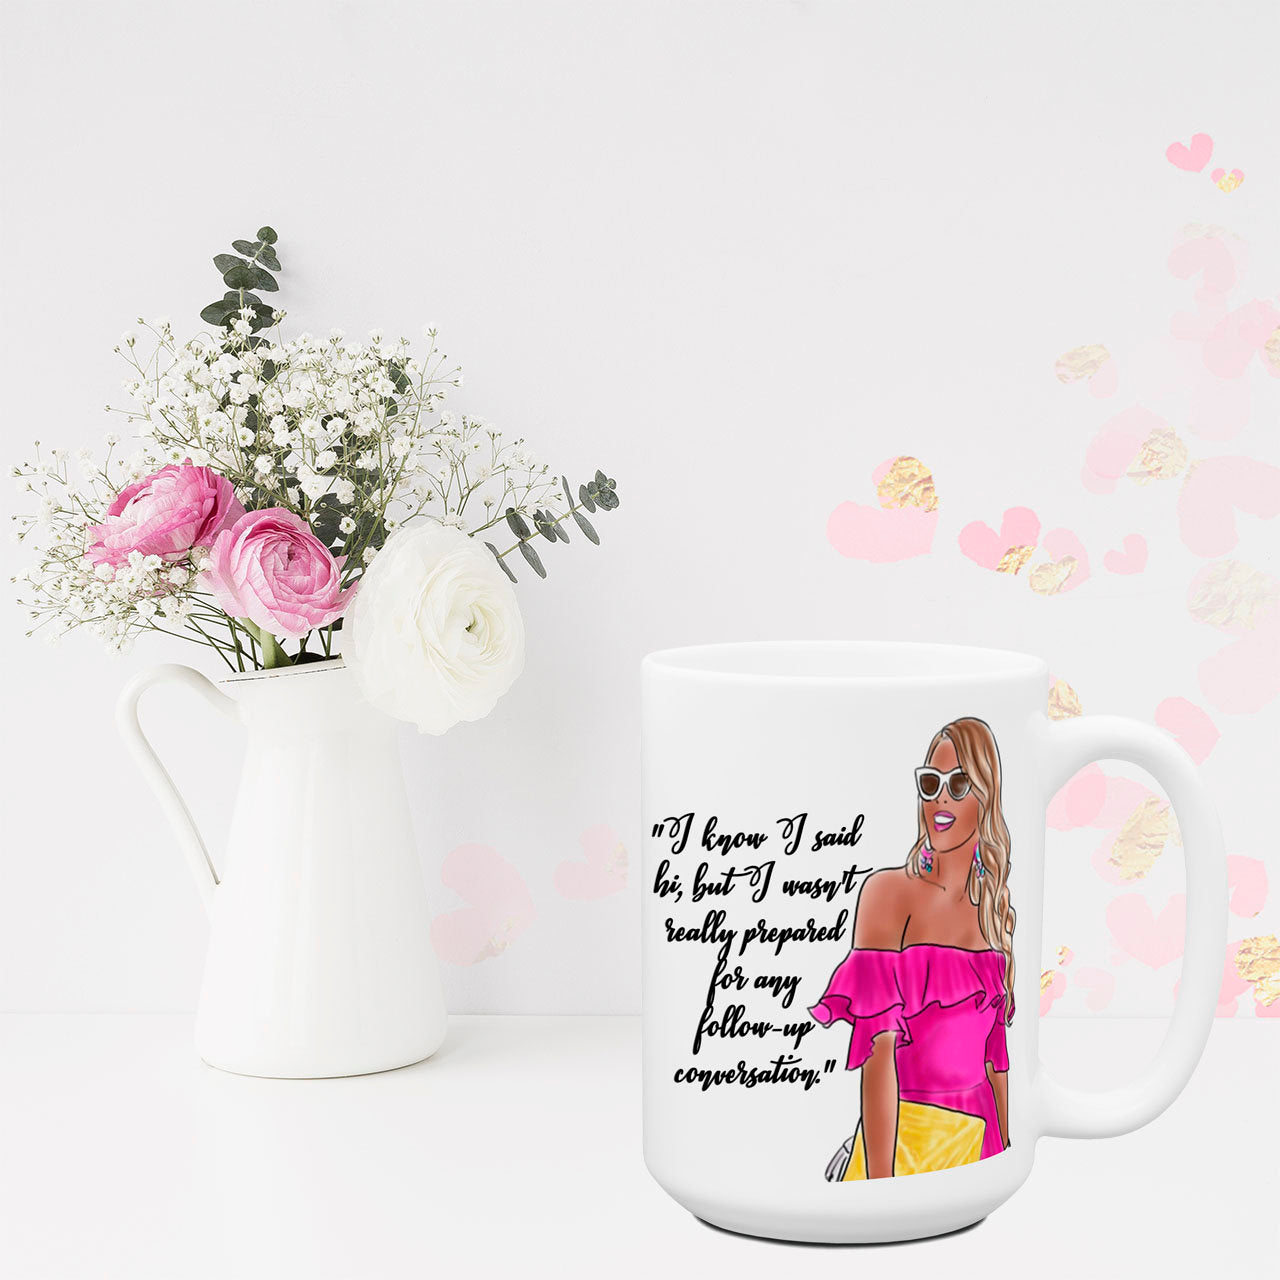 Not Prepared for Follow up Conversation Funny Coffee Mug | Office Humor Coworker Gift for Her | Work Friend